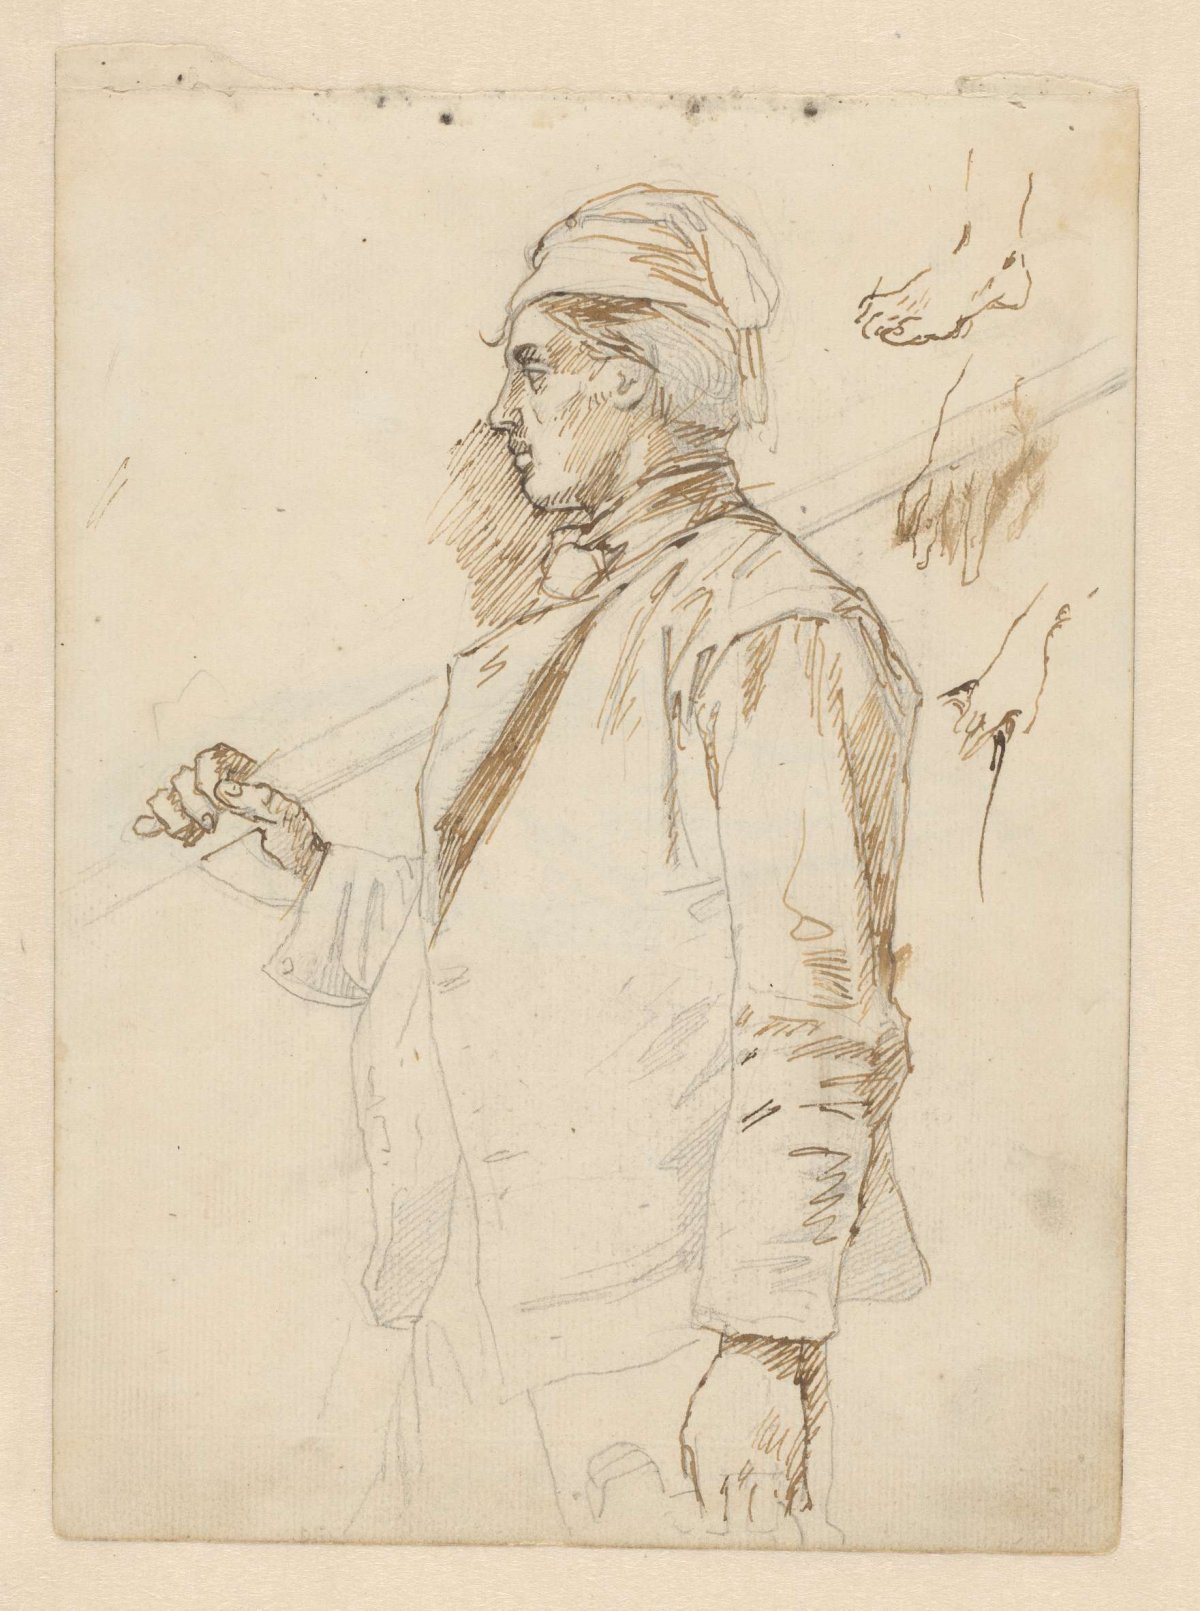 Study of a man with a cane over his shoulder, Matthijs Maris, after 1849 - before 1917